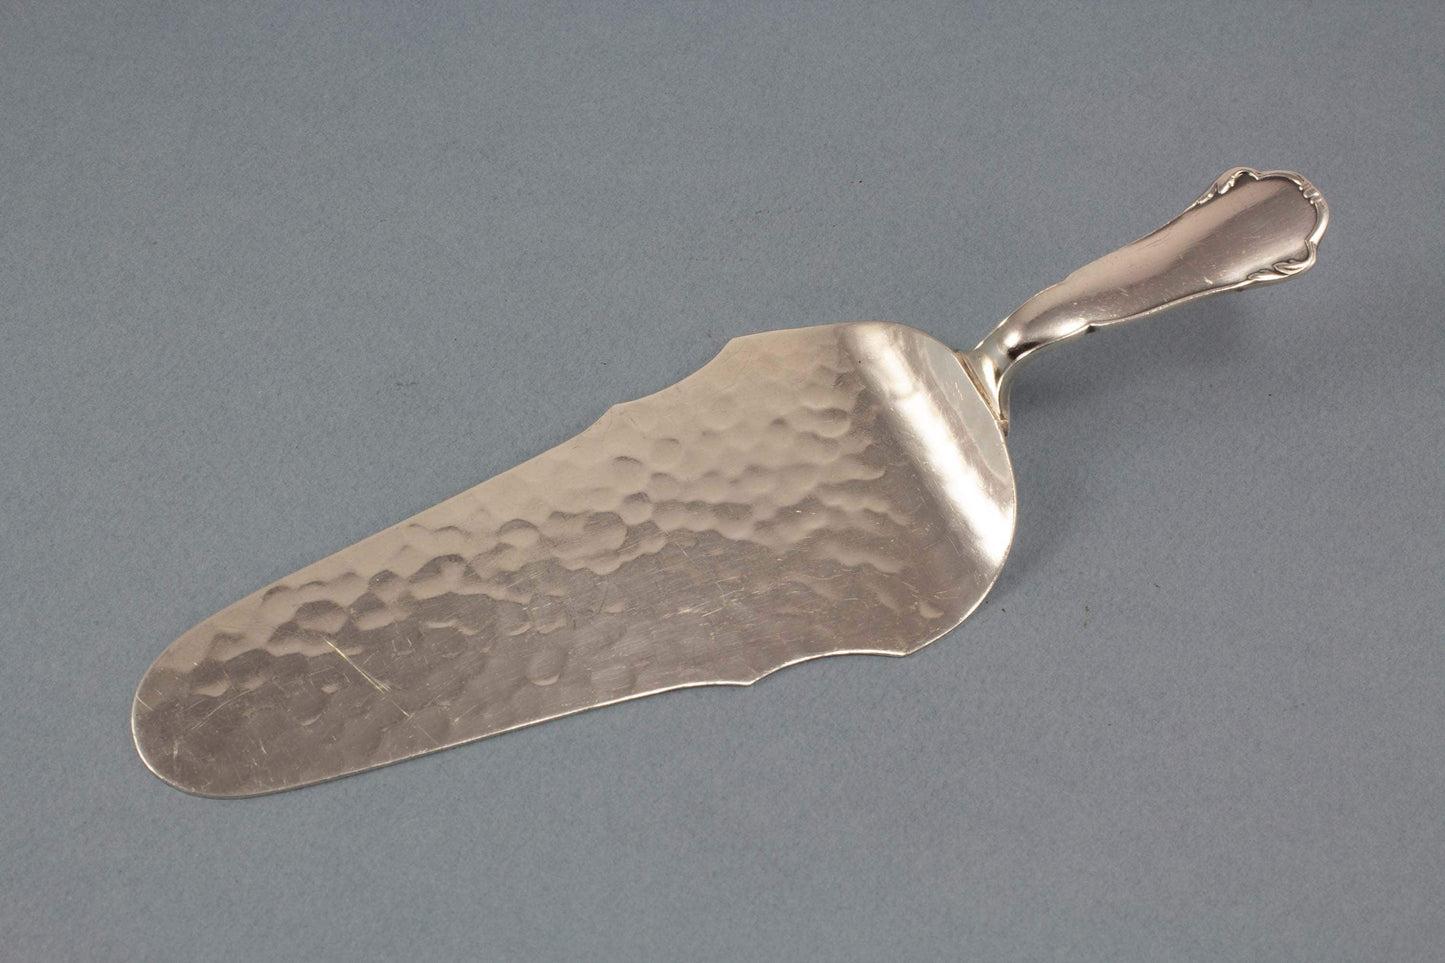 Nice pastry server, WMF 2700, silver plated, hammered pattern 